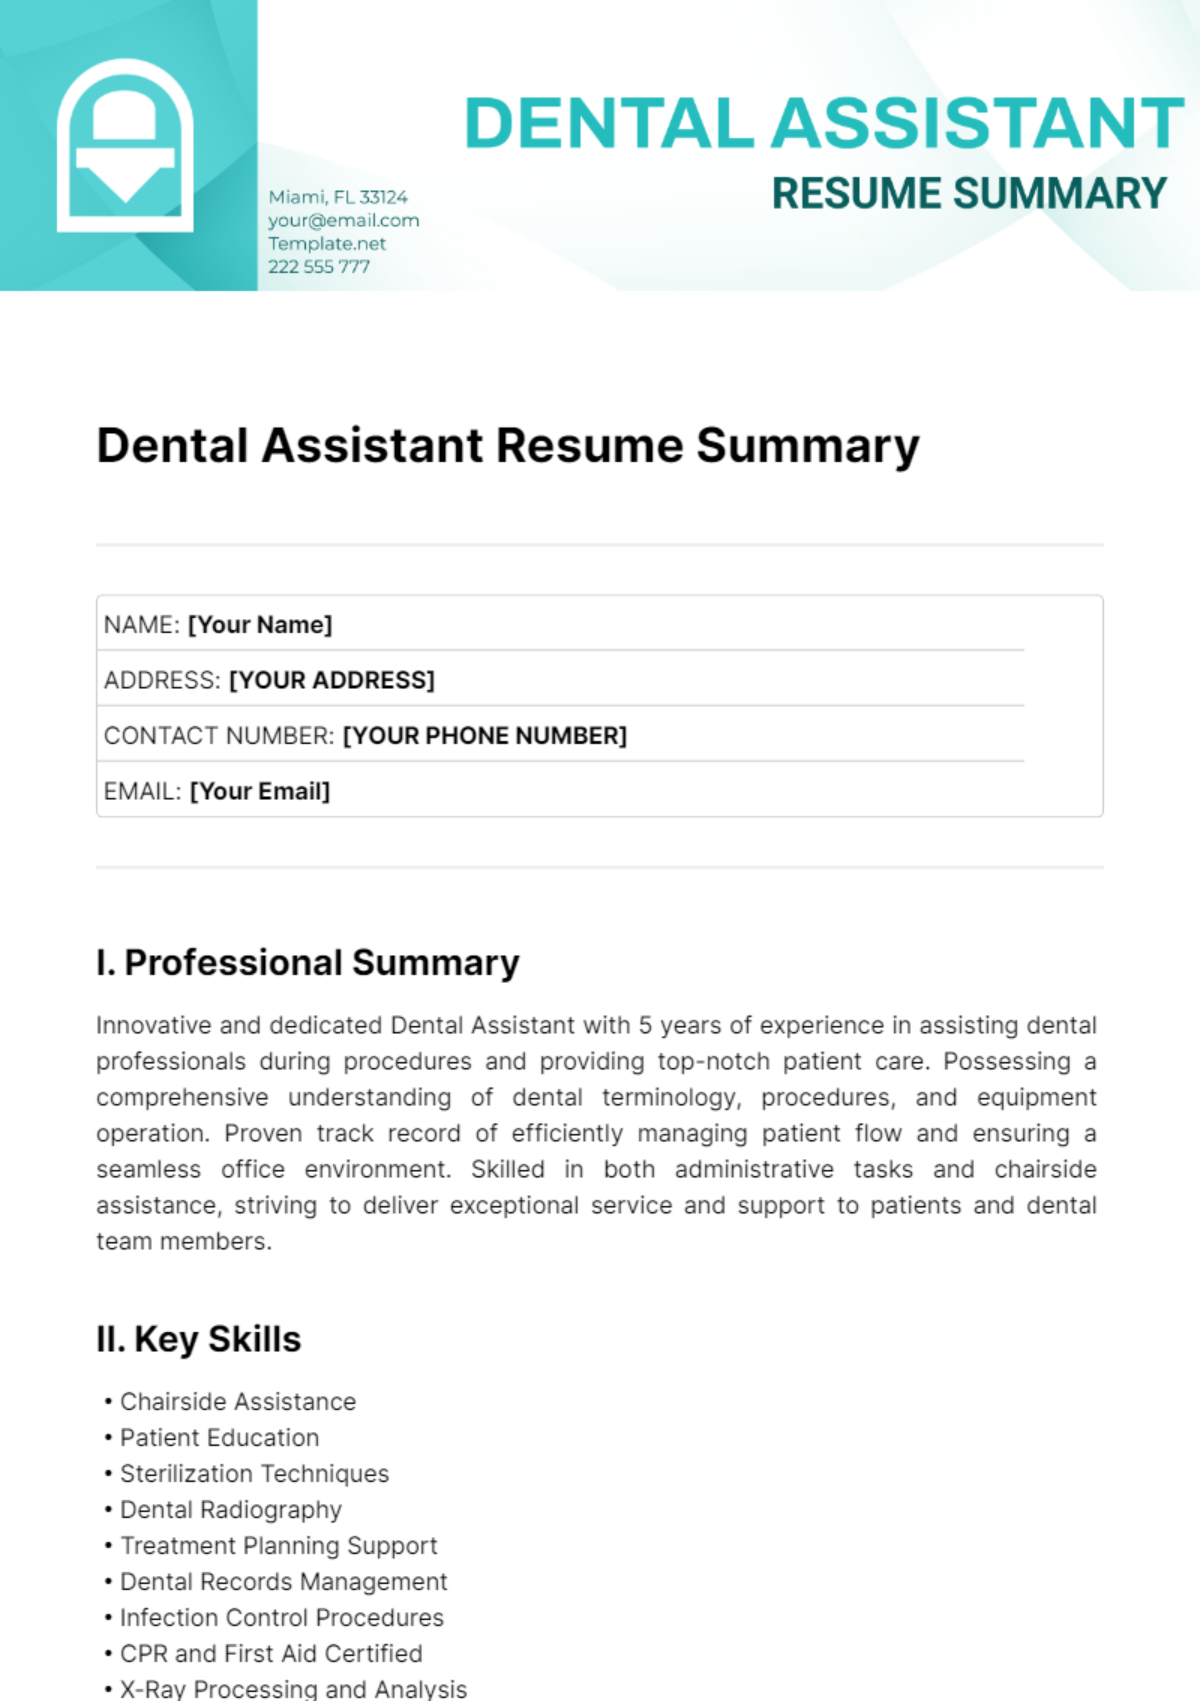 Free Dental Assistant Resume Summary Template